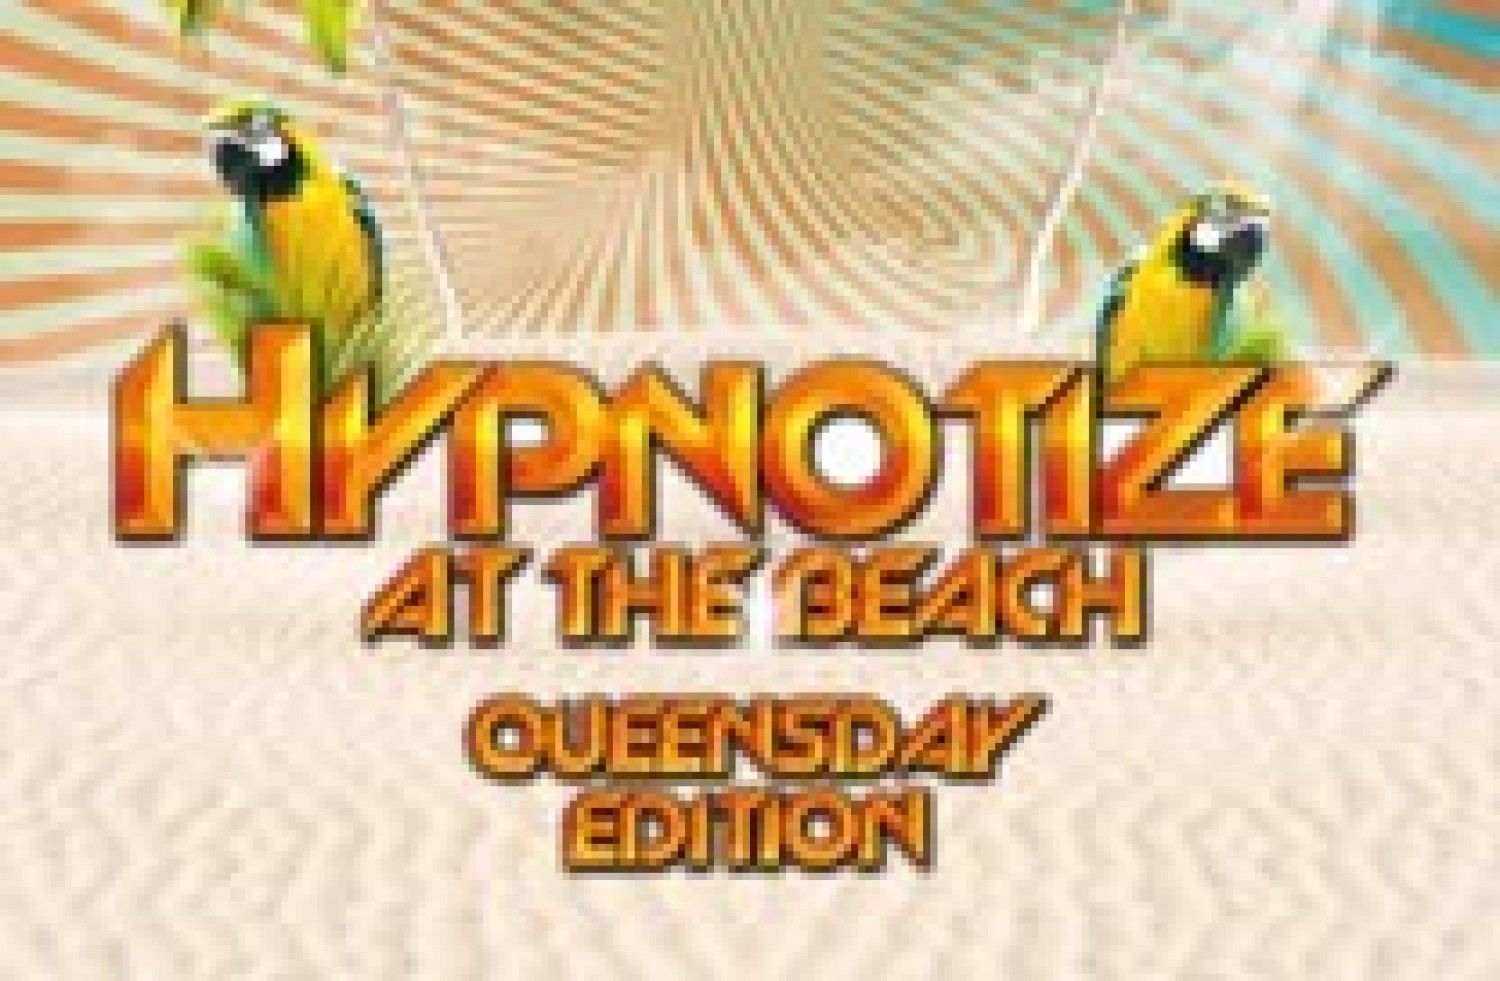 Party report: Hypnotize at the Beach – Beachclub Vroeger, 27 april 2013